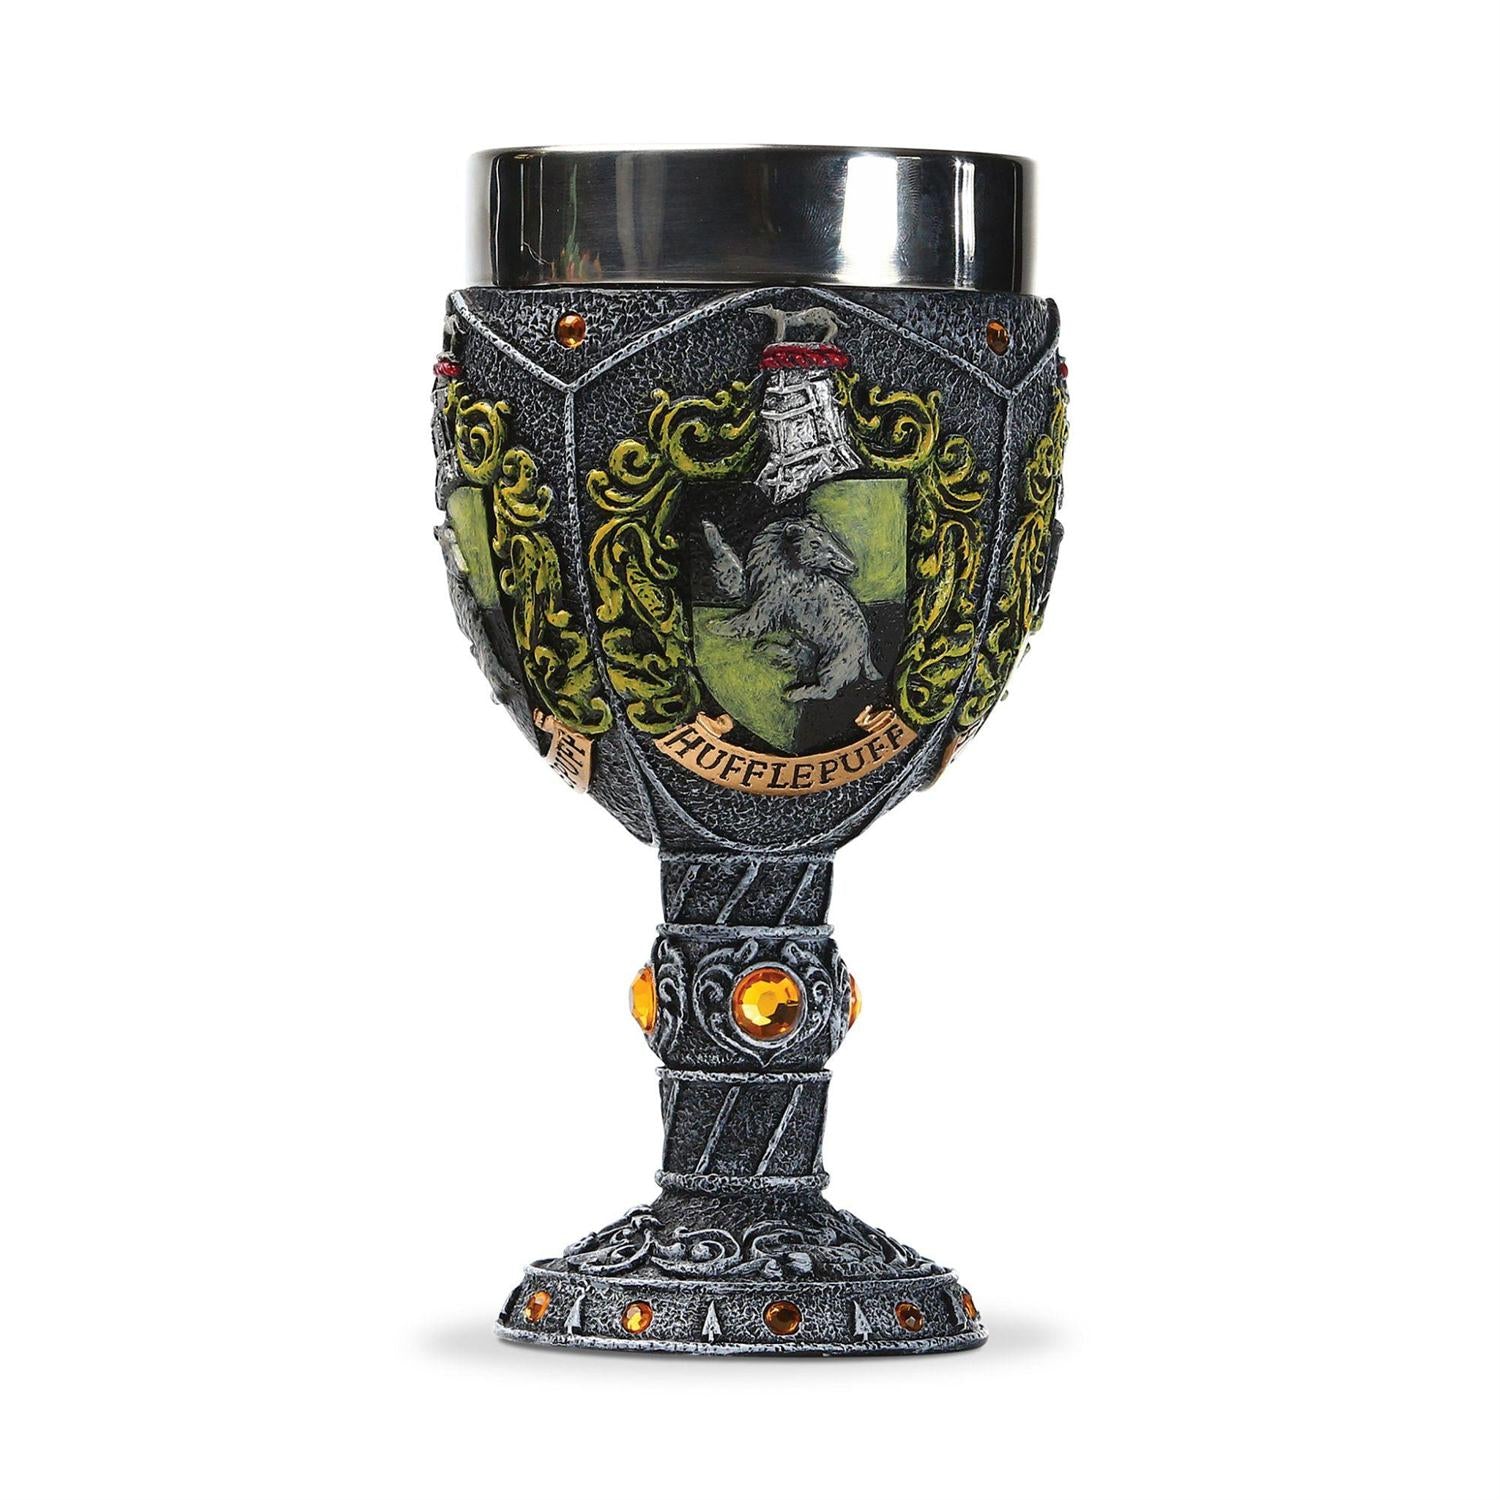 he badger, Helga Hufflepuff accepted and welcomed witches and wizards of all kinds - goblet